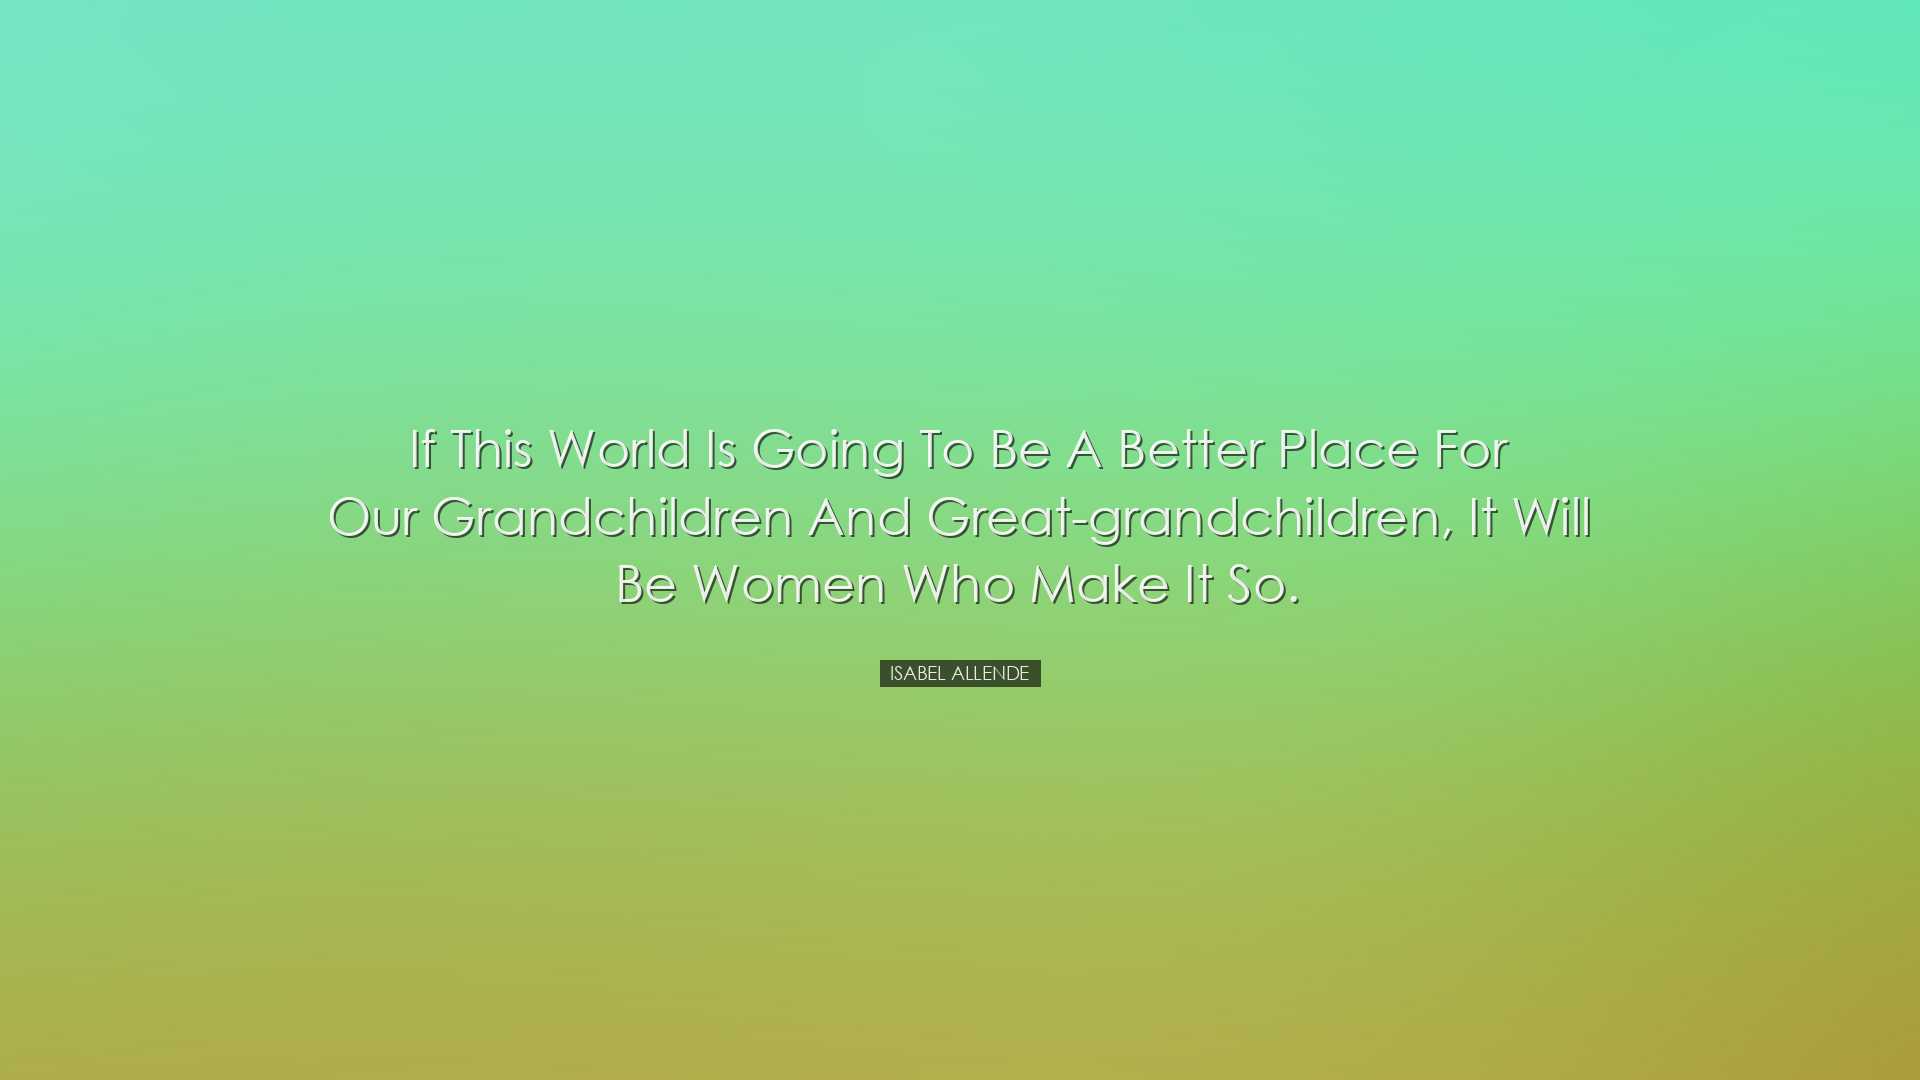 If this world is going to be a better place for our grandchildren